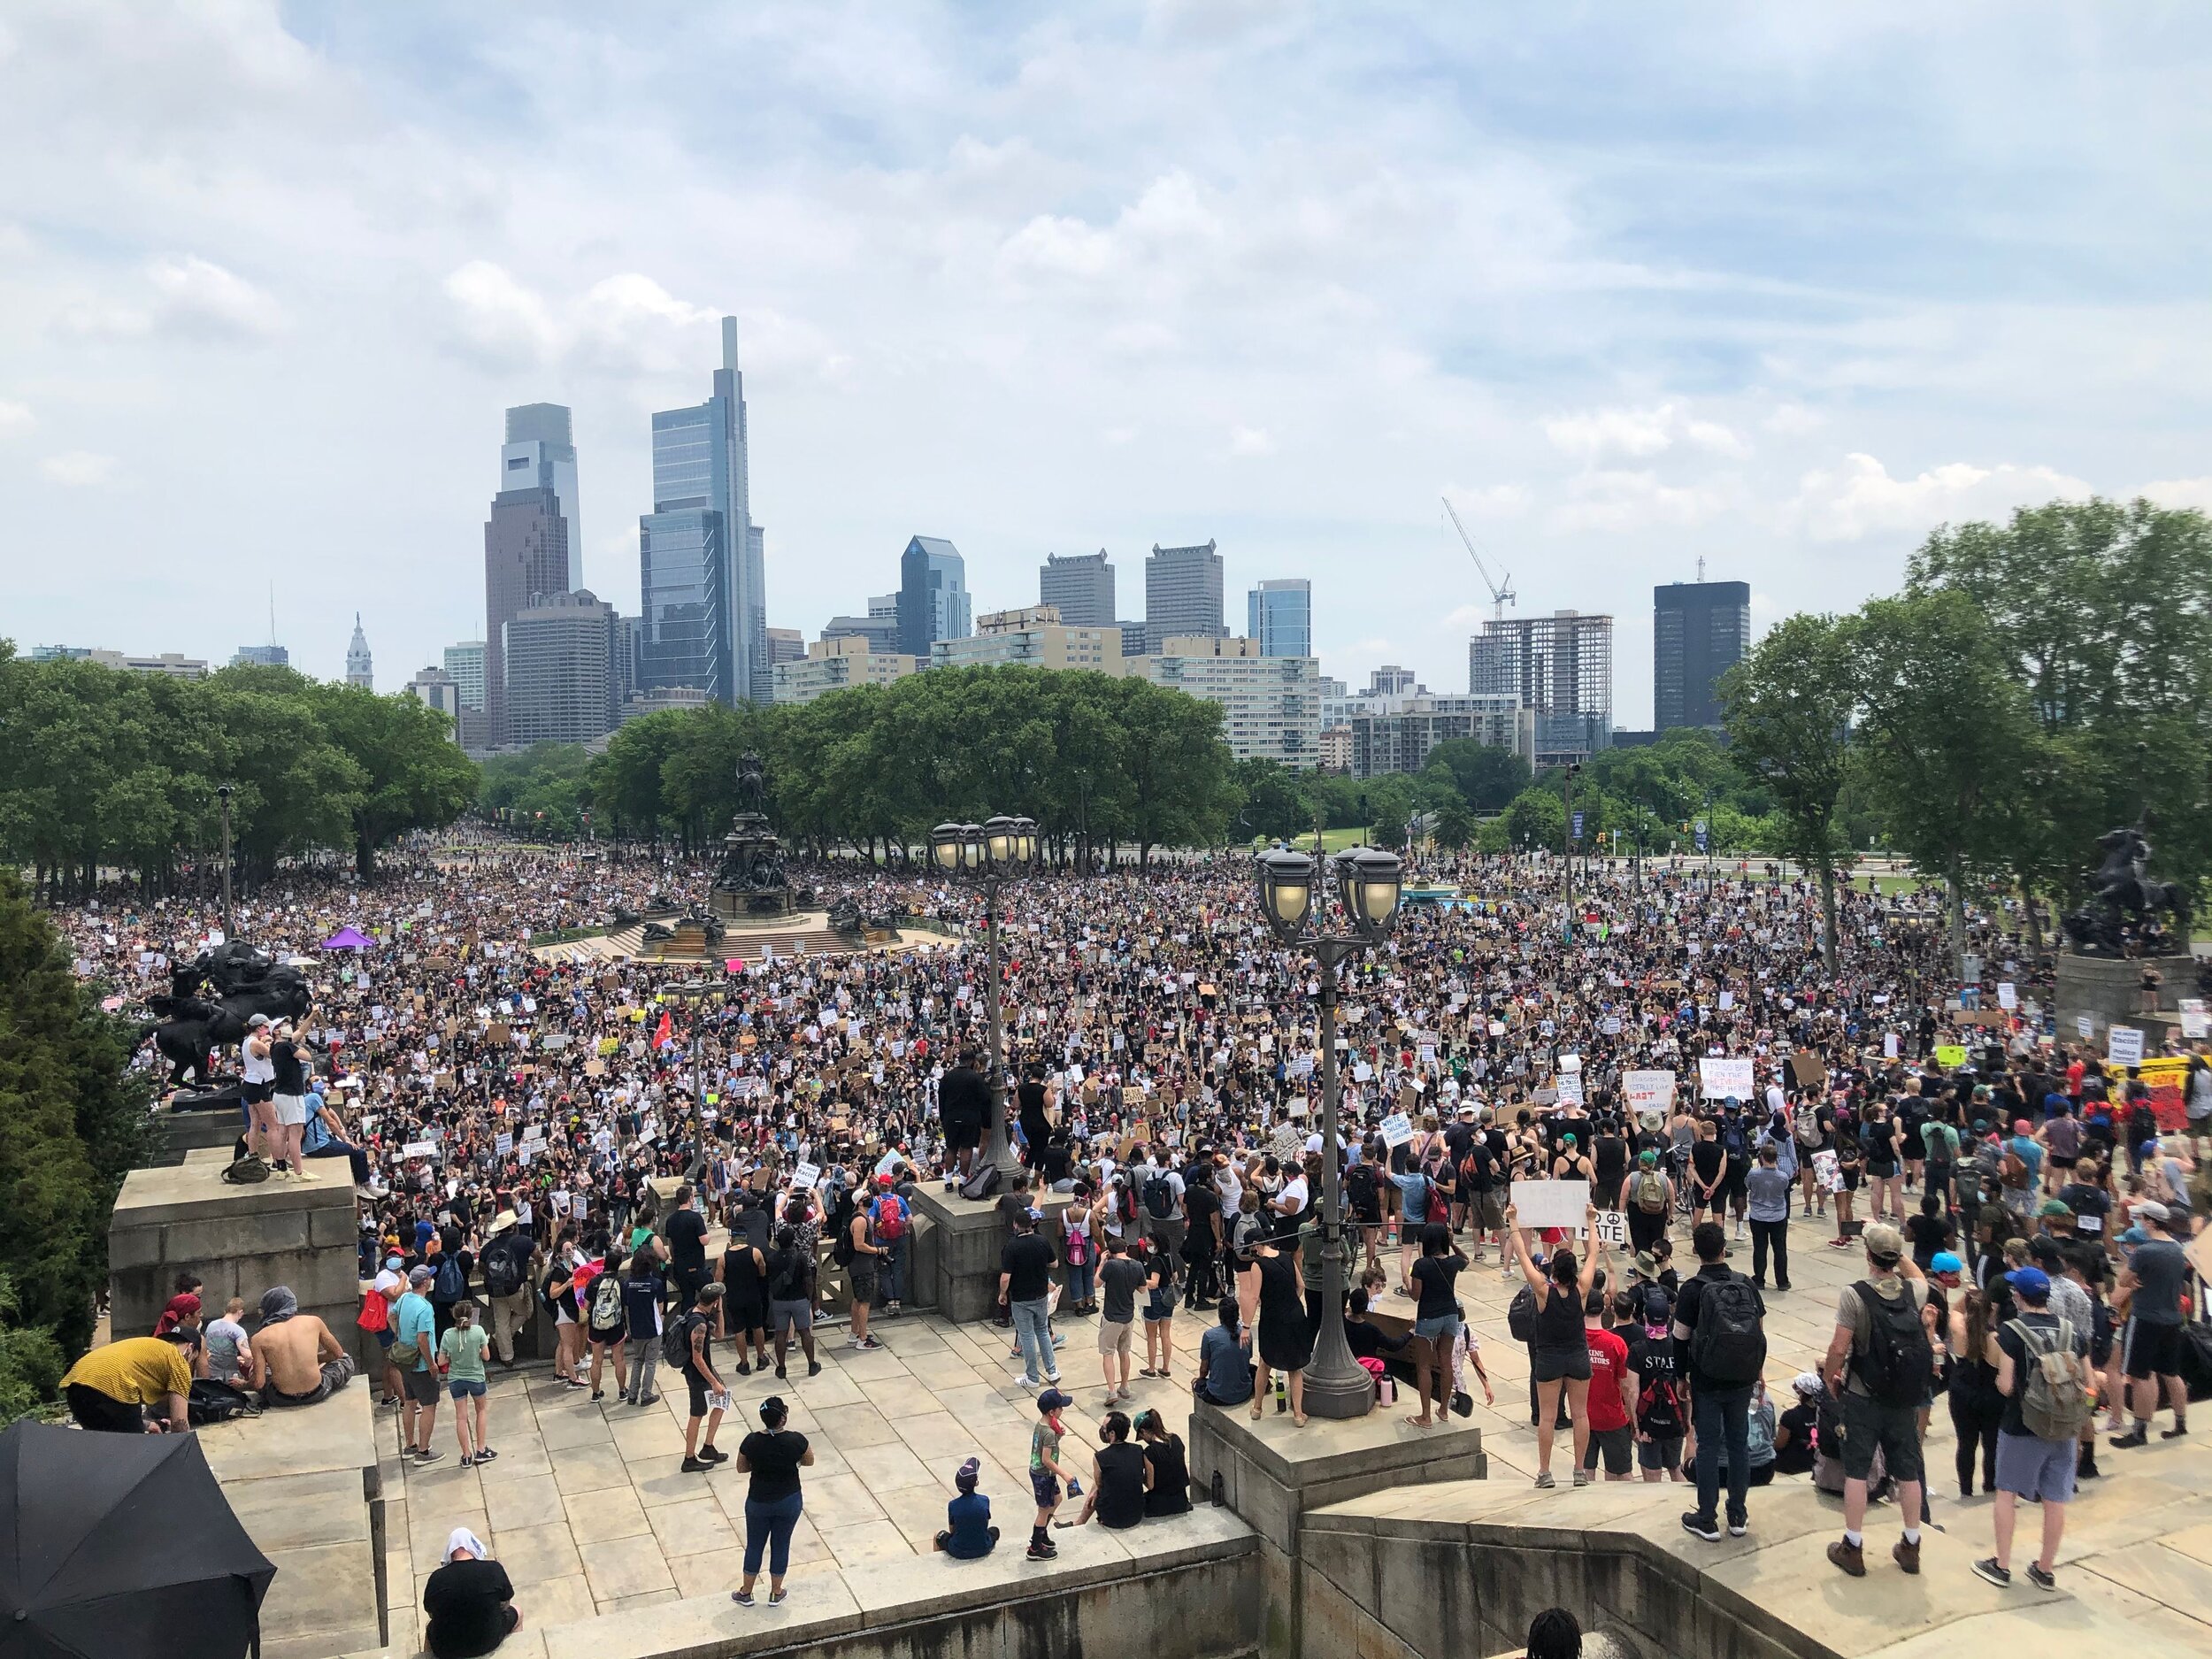 Protesters gathered at the steps of the Philadelphia Museum of art in the summer of 2020.